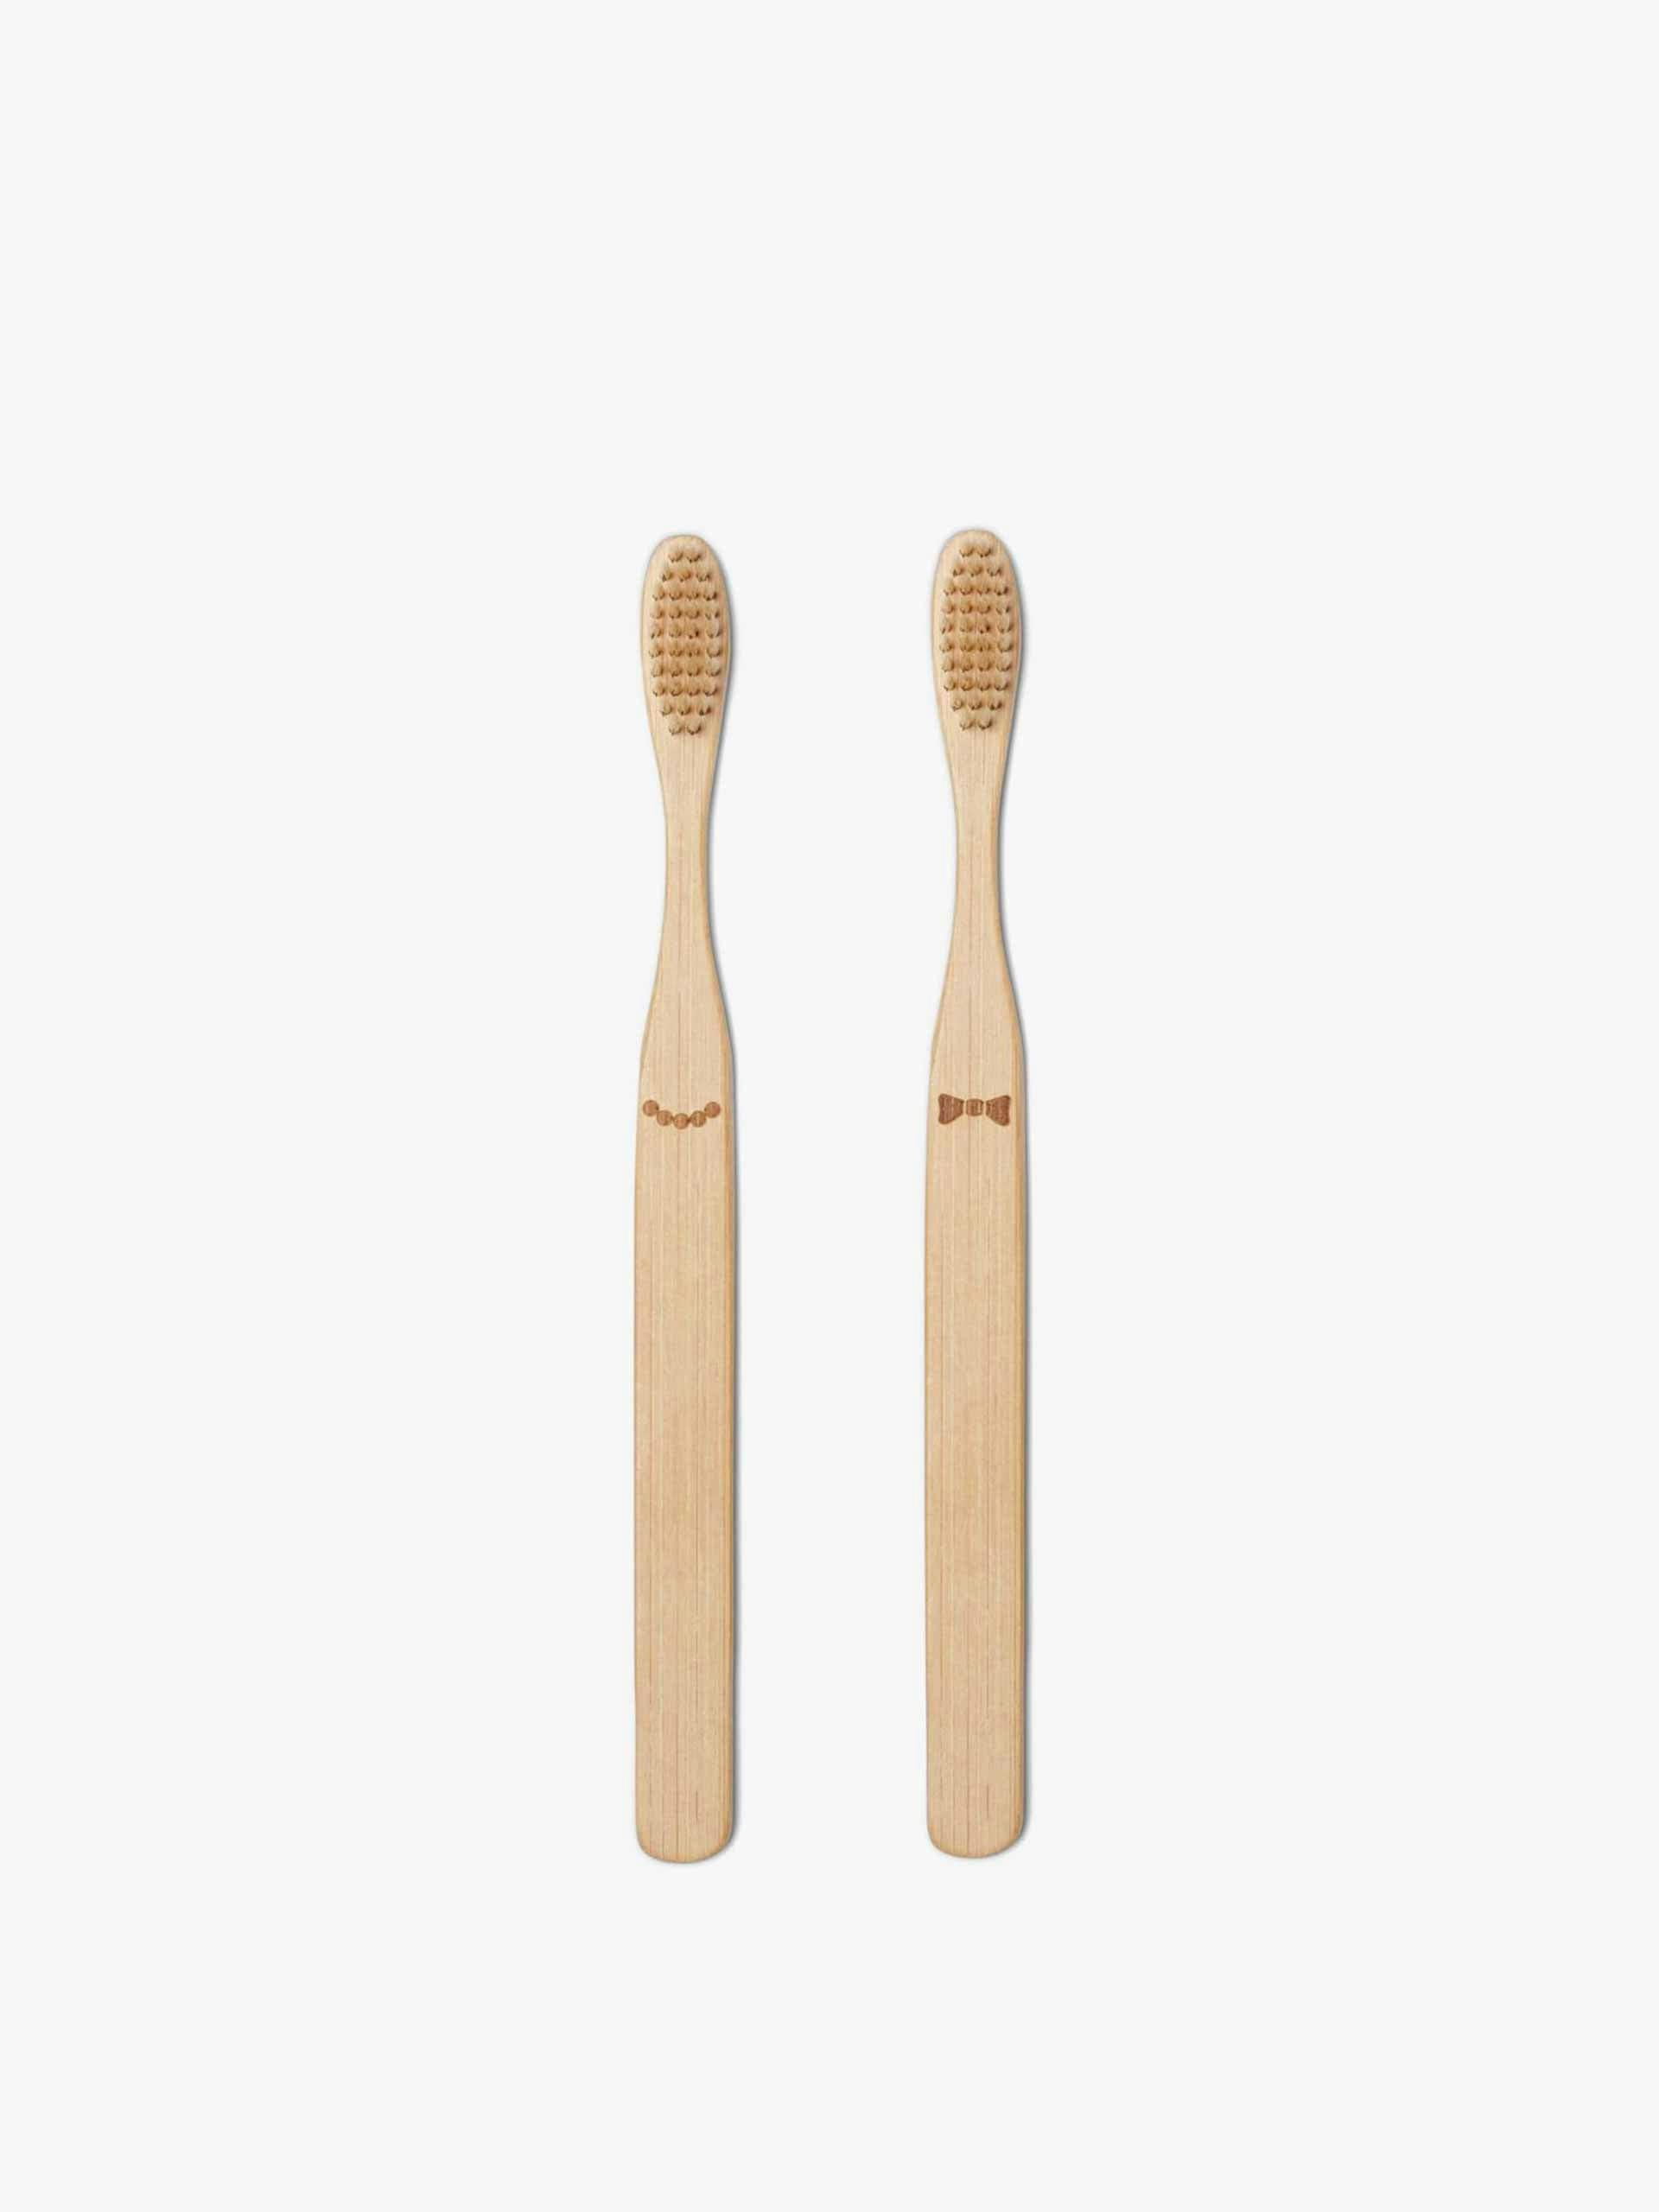 His and hers bamboo toothbrushes